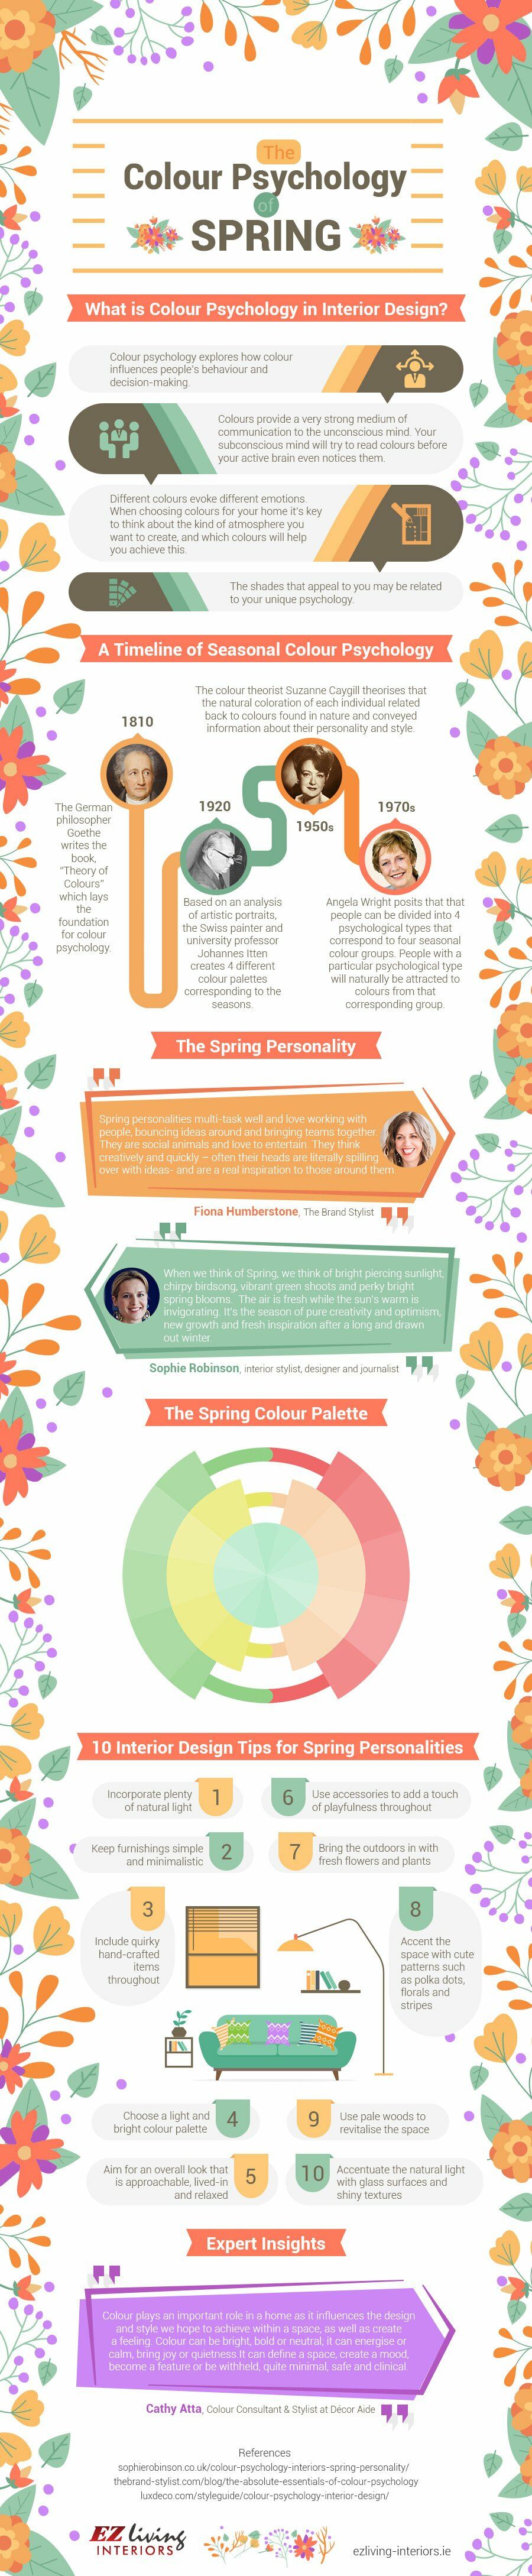 The Colour Psychology of Spring Infographic